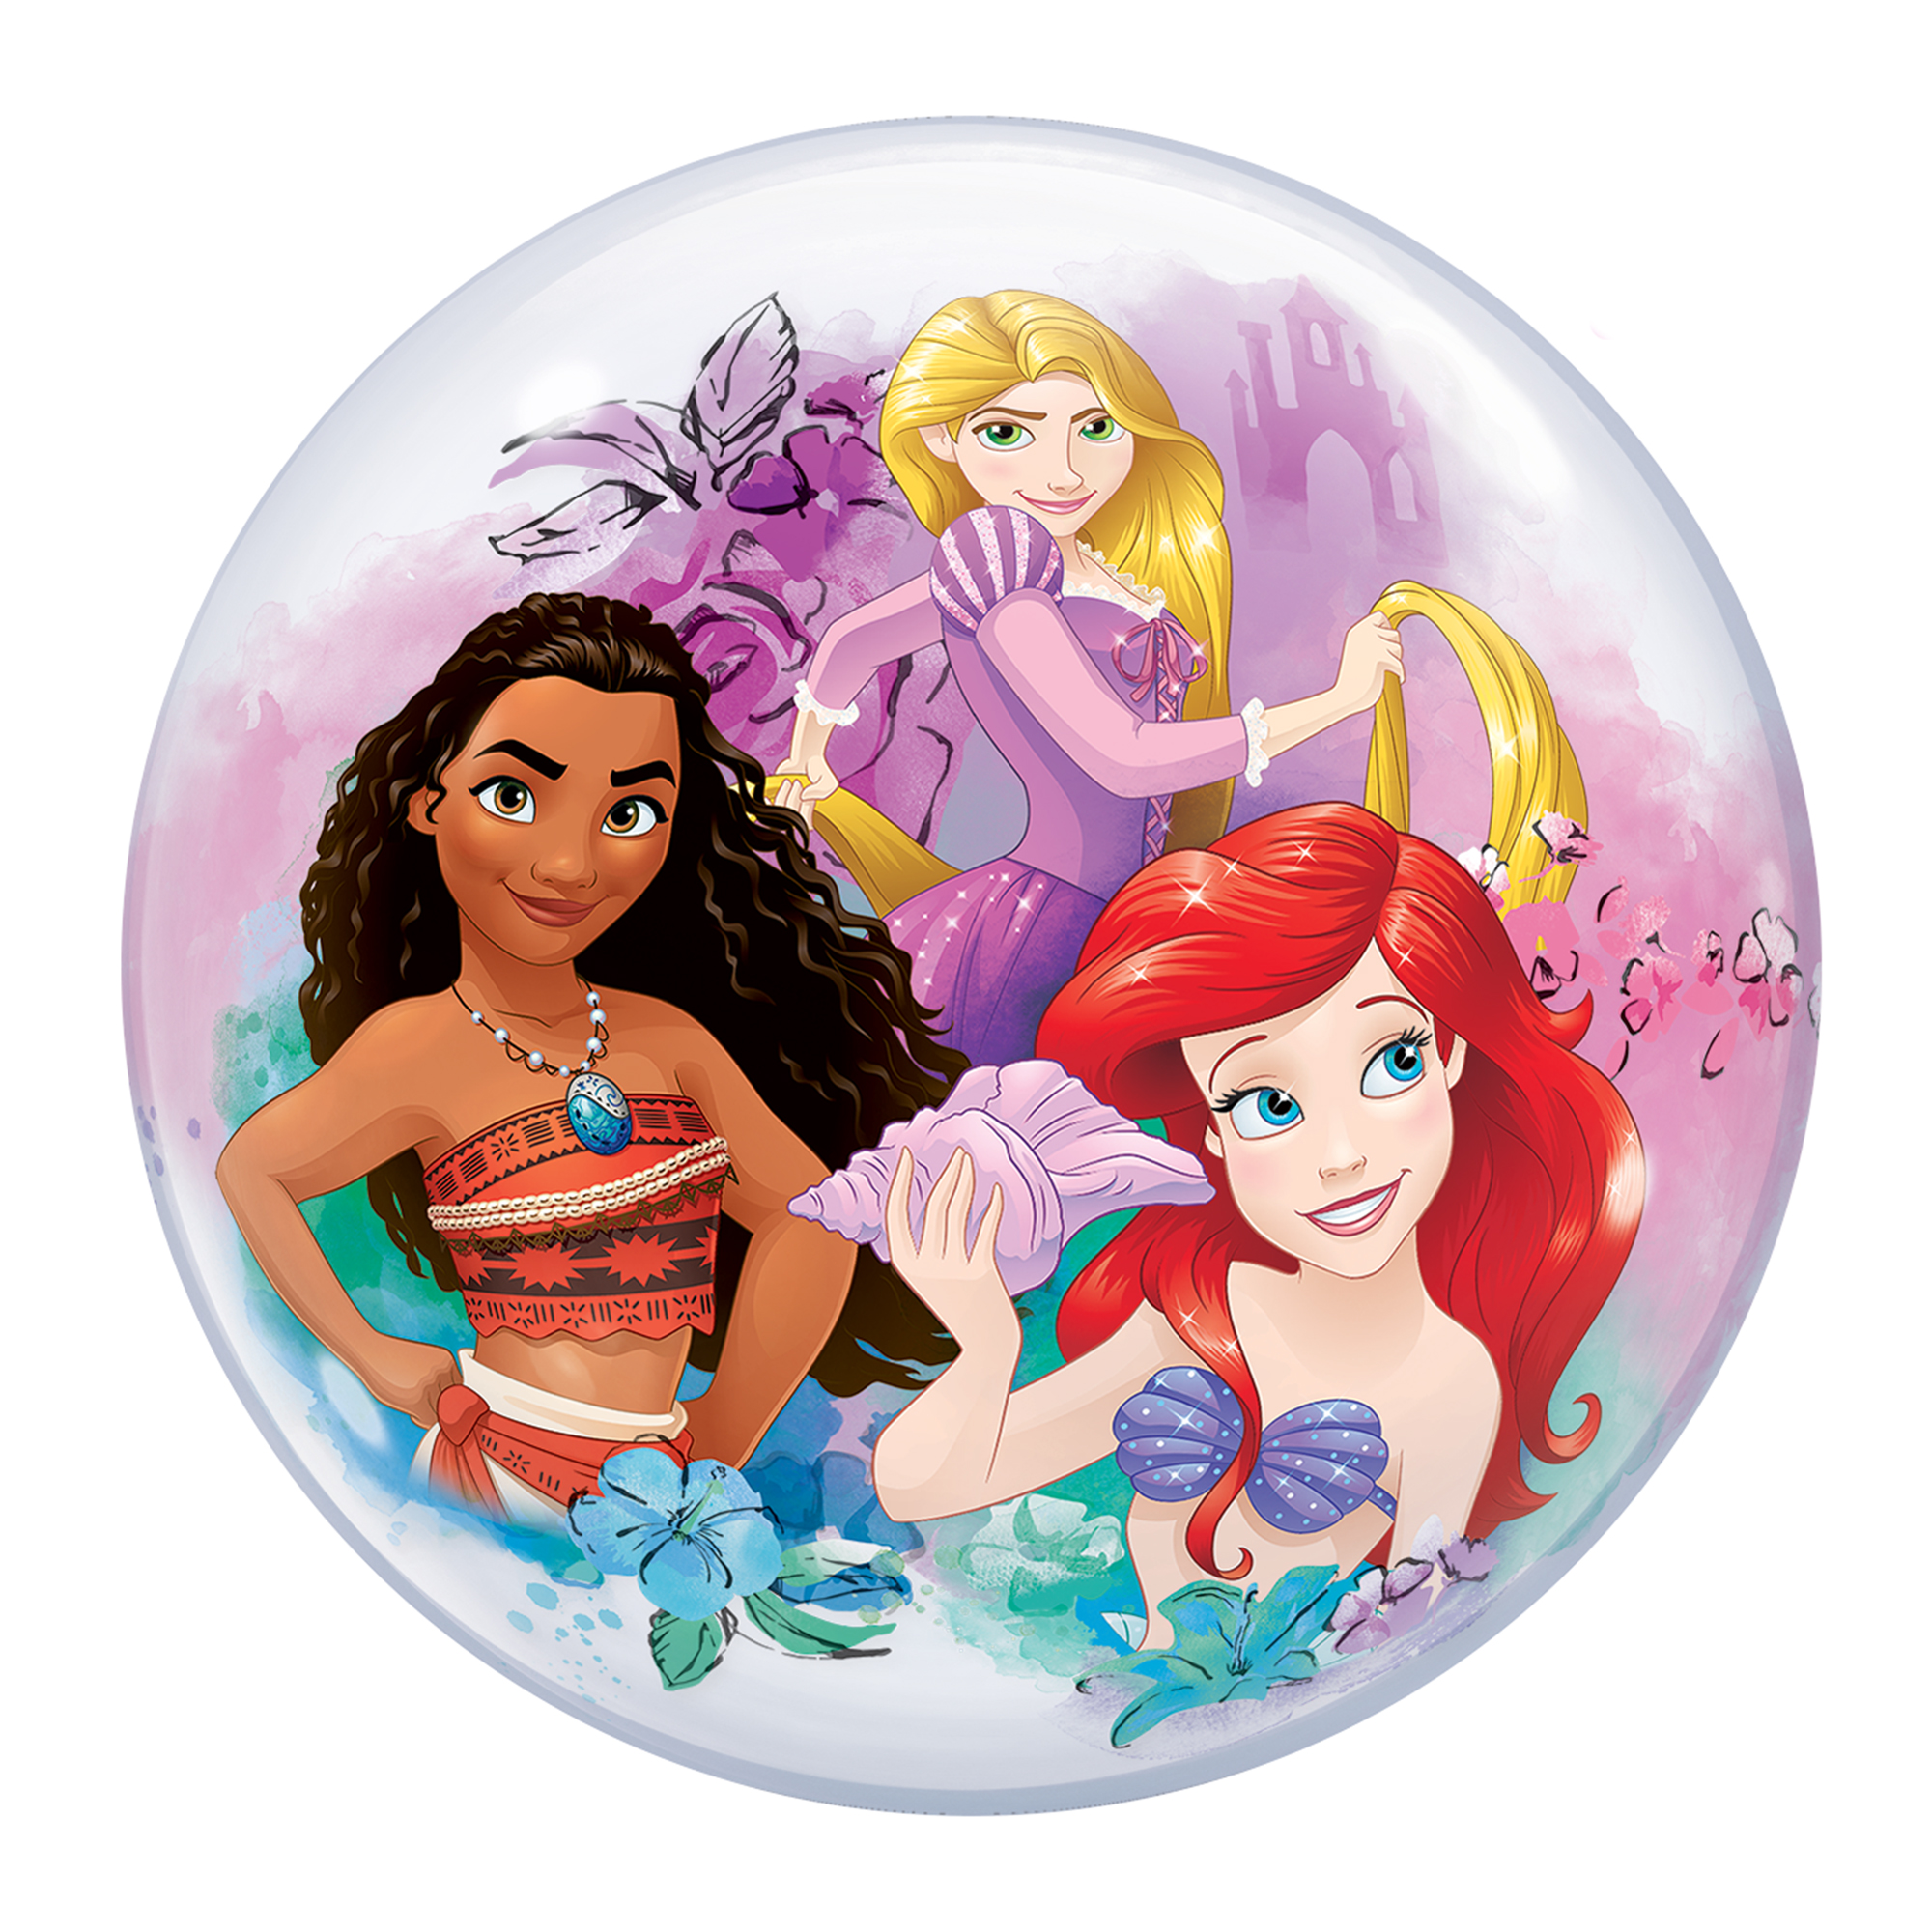 22-Inch Disney Princess Bubble Balloon - DELIVERED INFLATED!